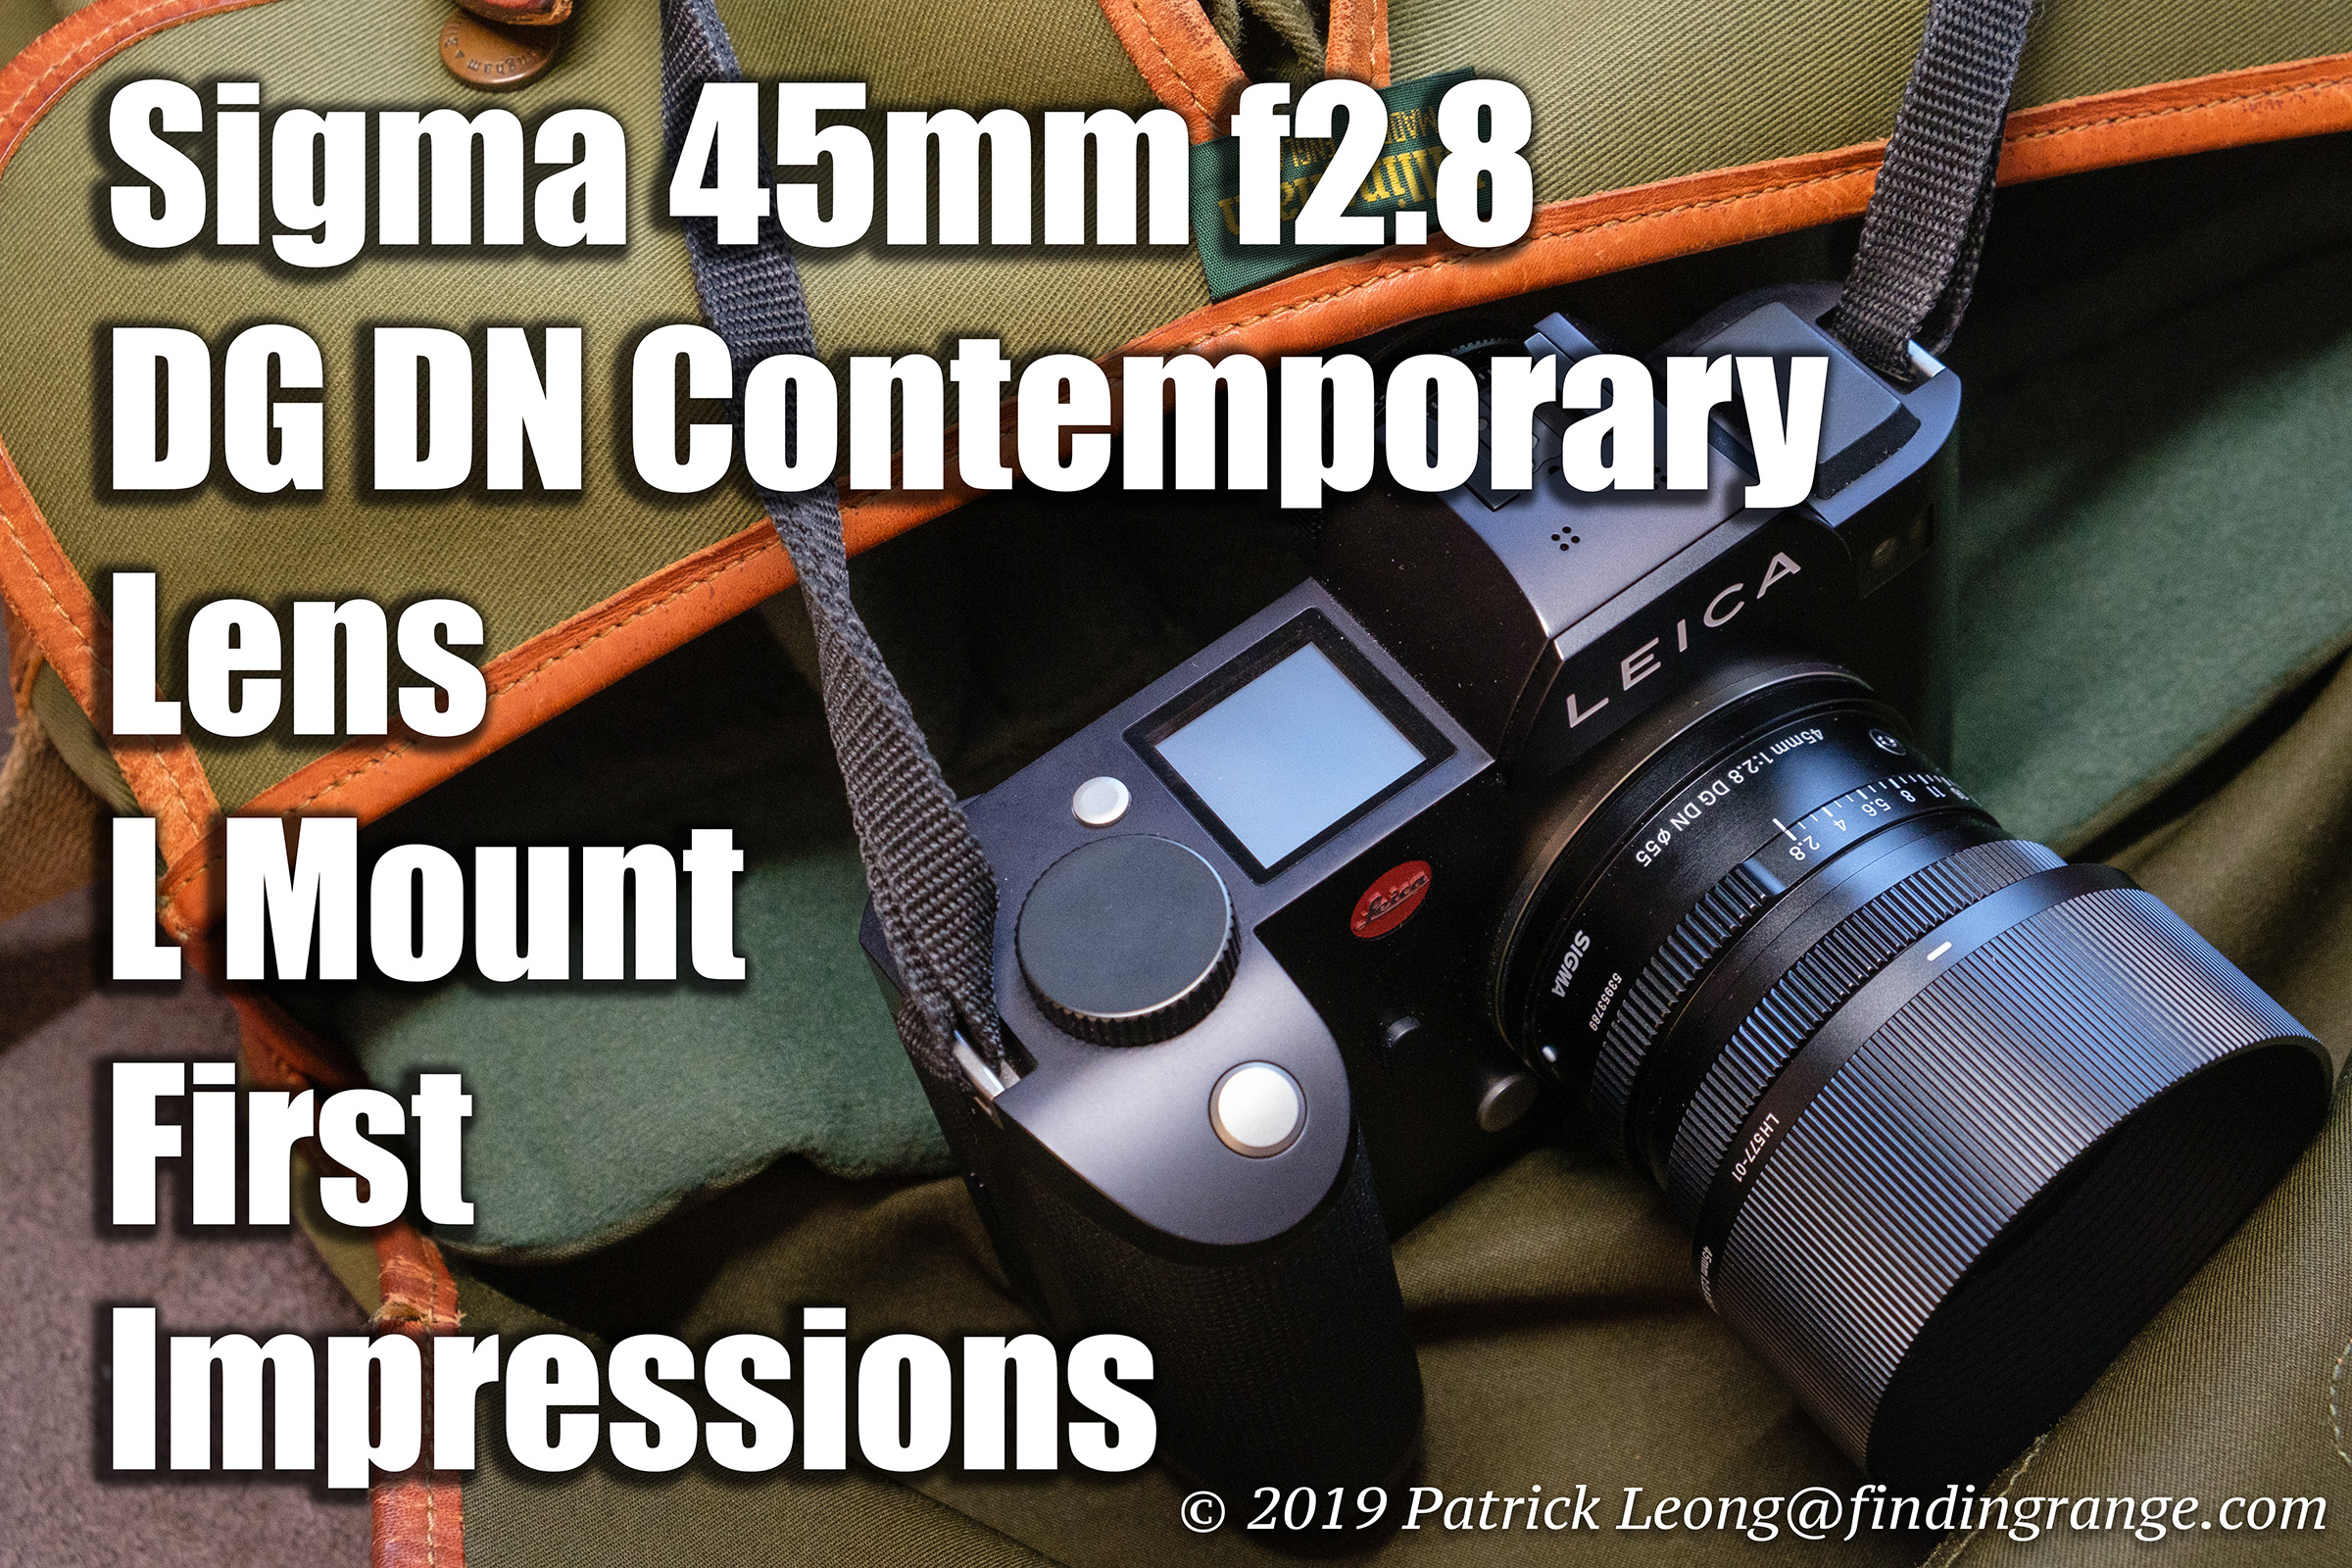 Sigma 45mm f2.8 DG DN Contemporary Lens L Mount First Impressions